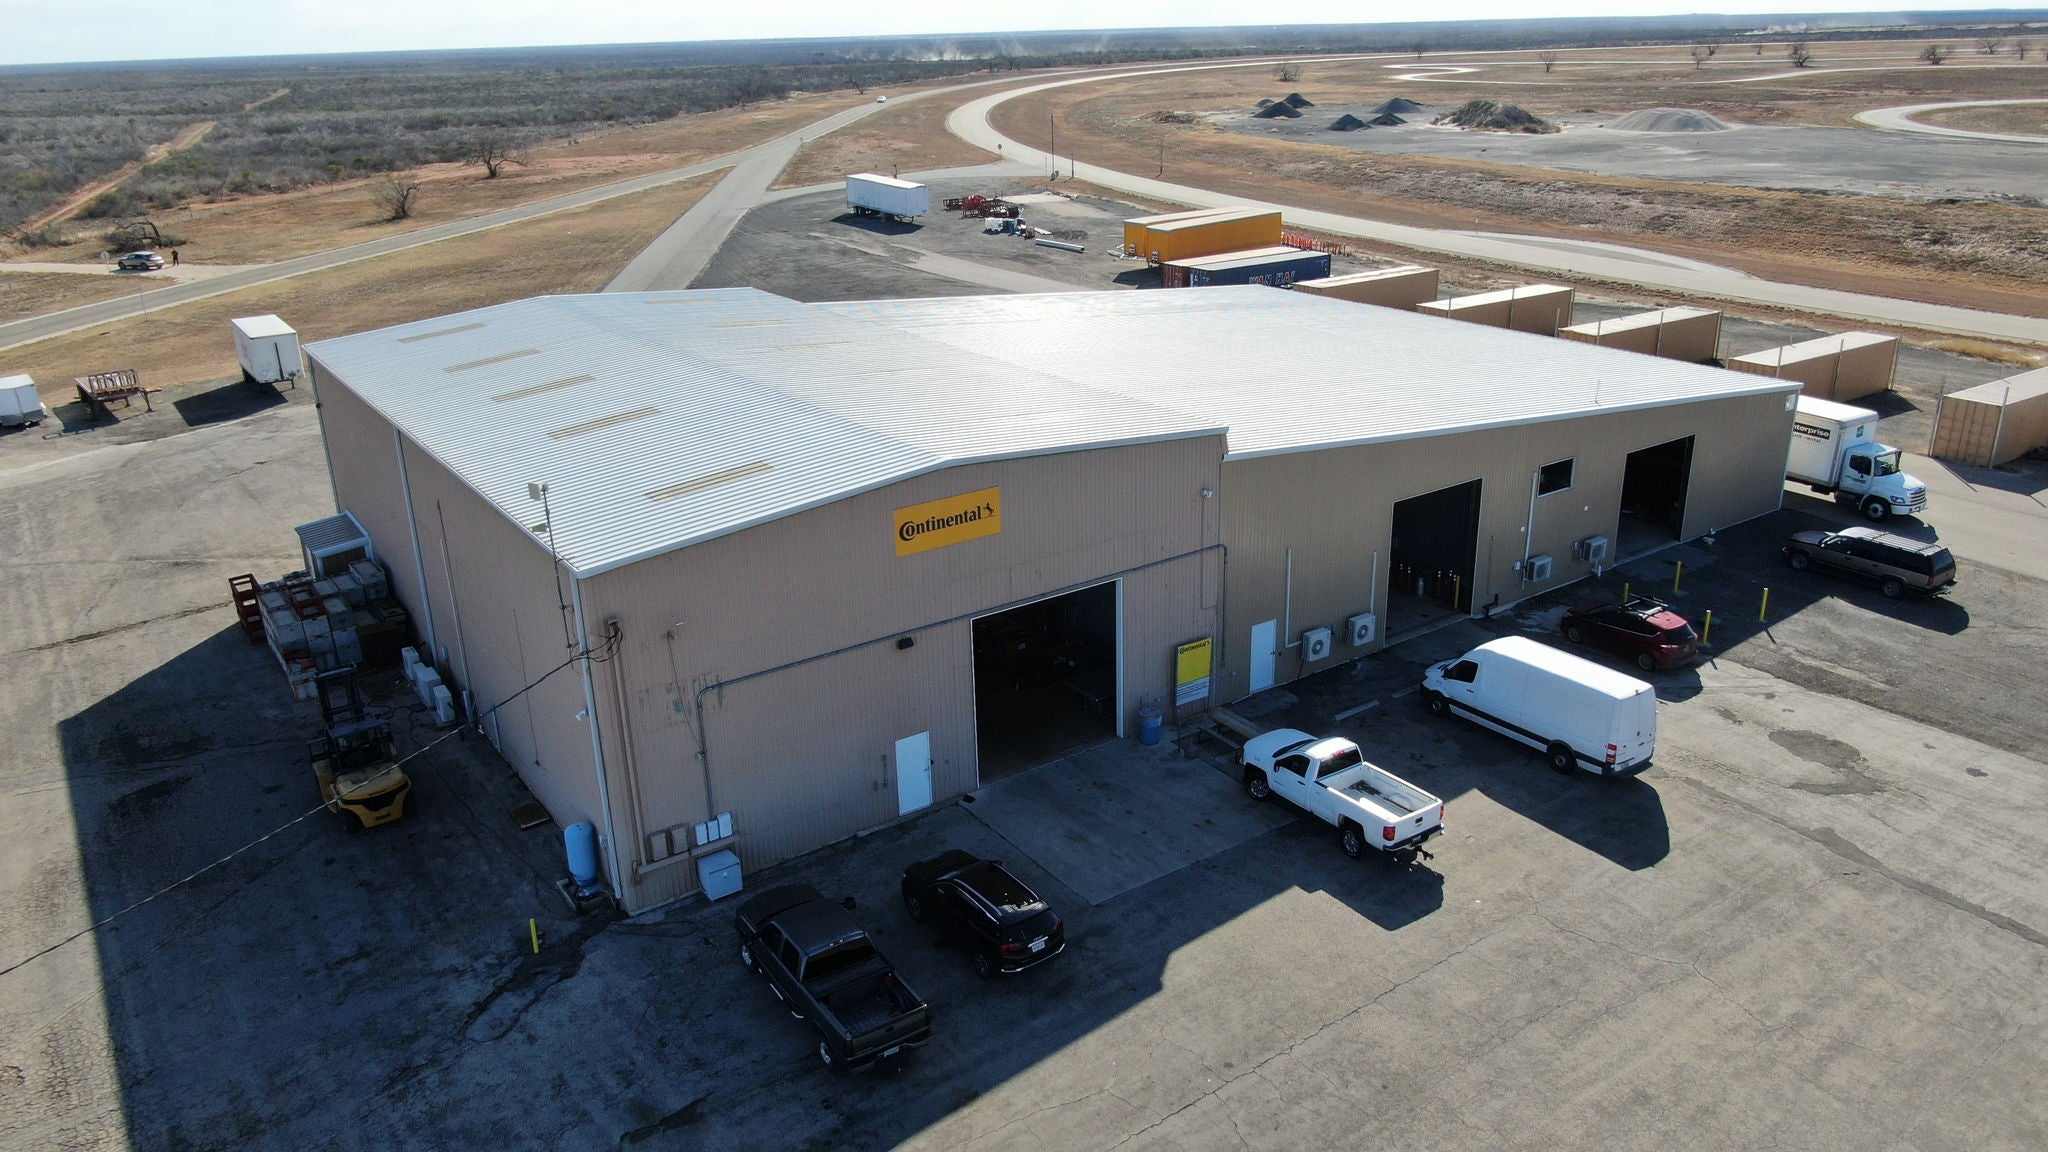 Inside Building G at Uvalde Proving Grounds, the service bays have skilled technicians who tend to vehicles. Whether it's fine-tuning performance, conducting safety checks, or ensuring reliability, this facility has a role in keeping vehicles road-ready.